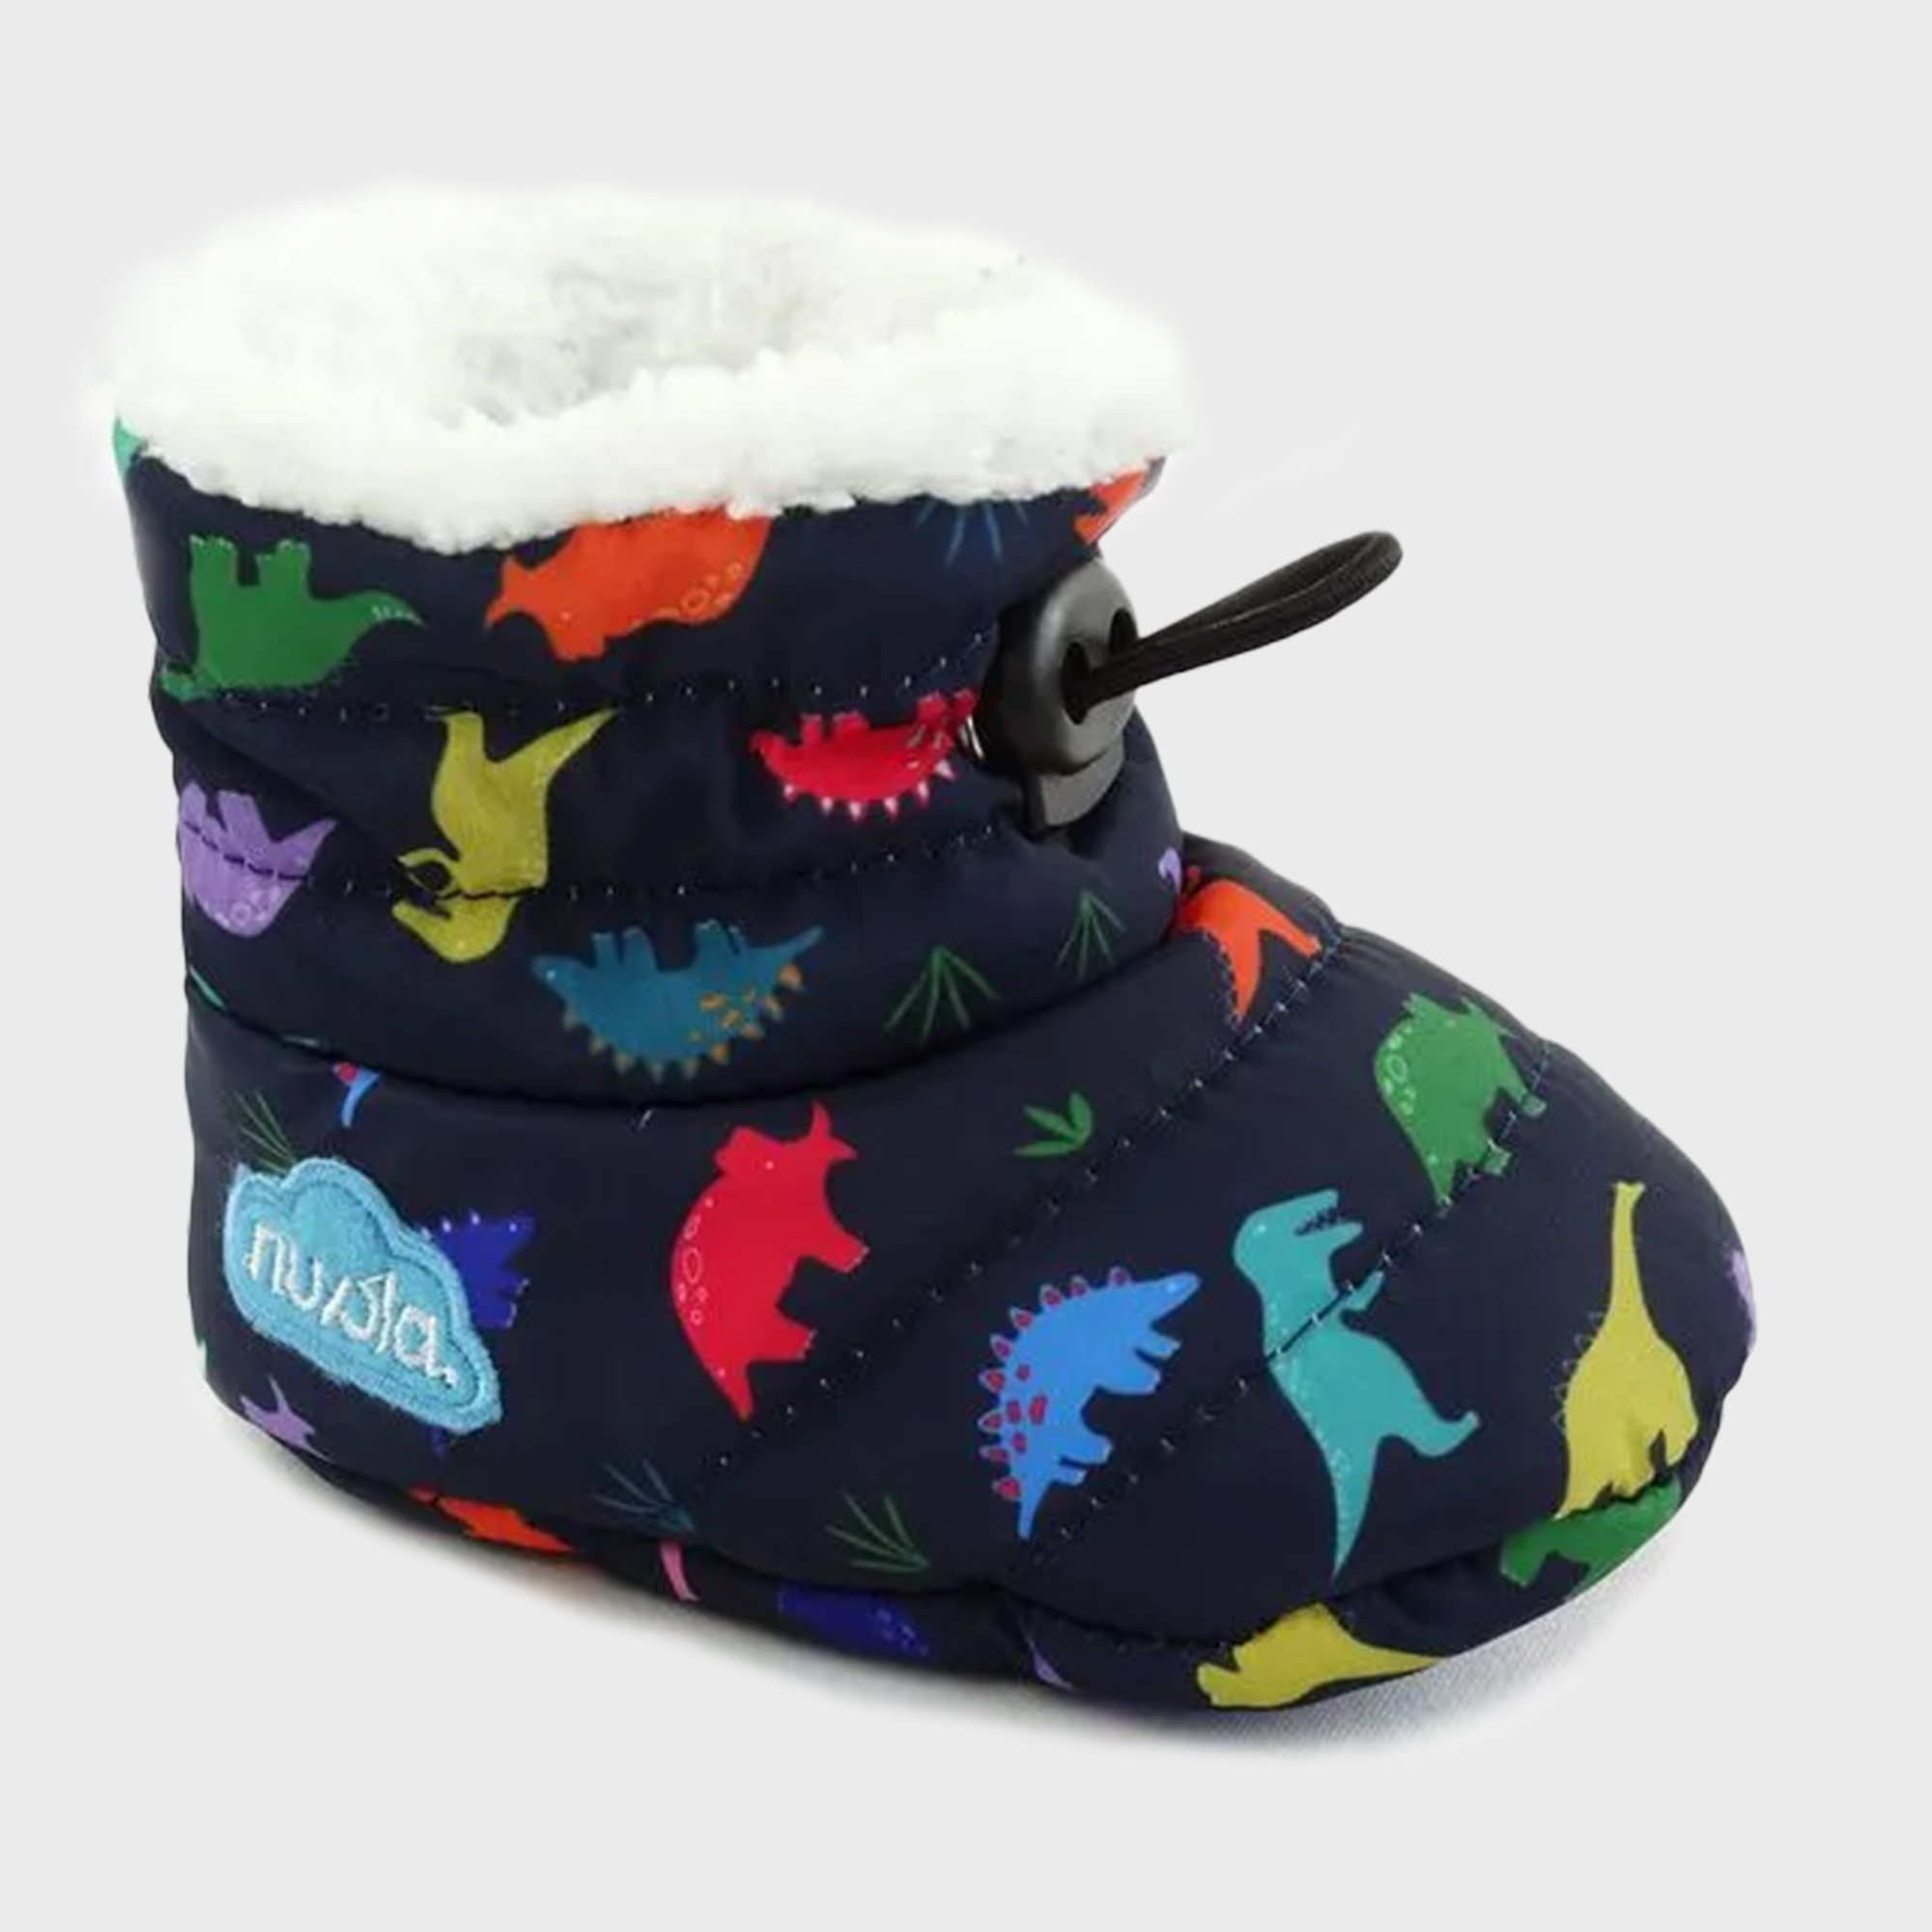 Nuvola Printed Baby Slippers in Dino Navy CNBBYDN0684 FROM EIGHTYWINGOLD - OFFICIAL BRAND PARTNER